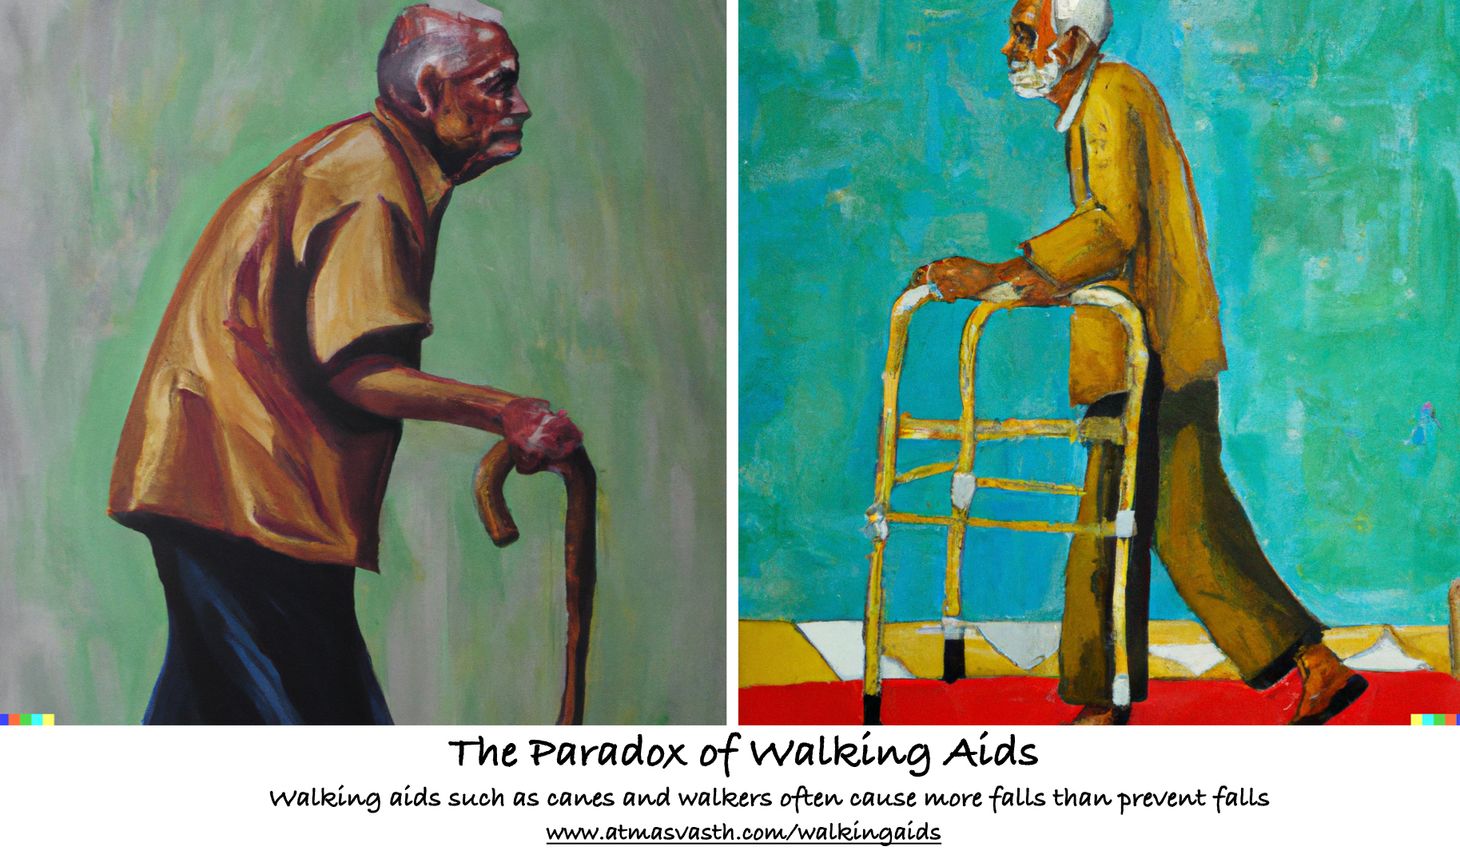 The Paradox of Walking Aids